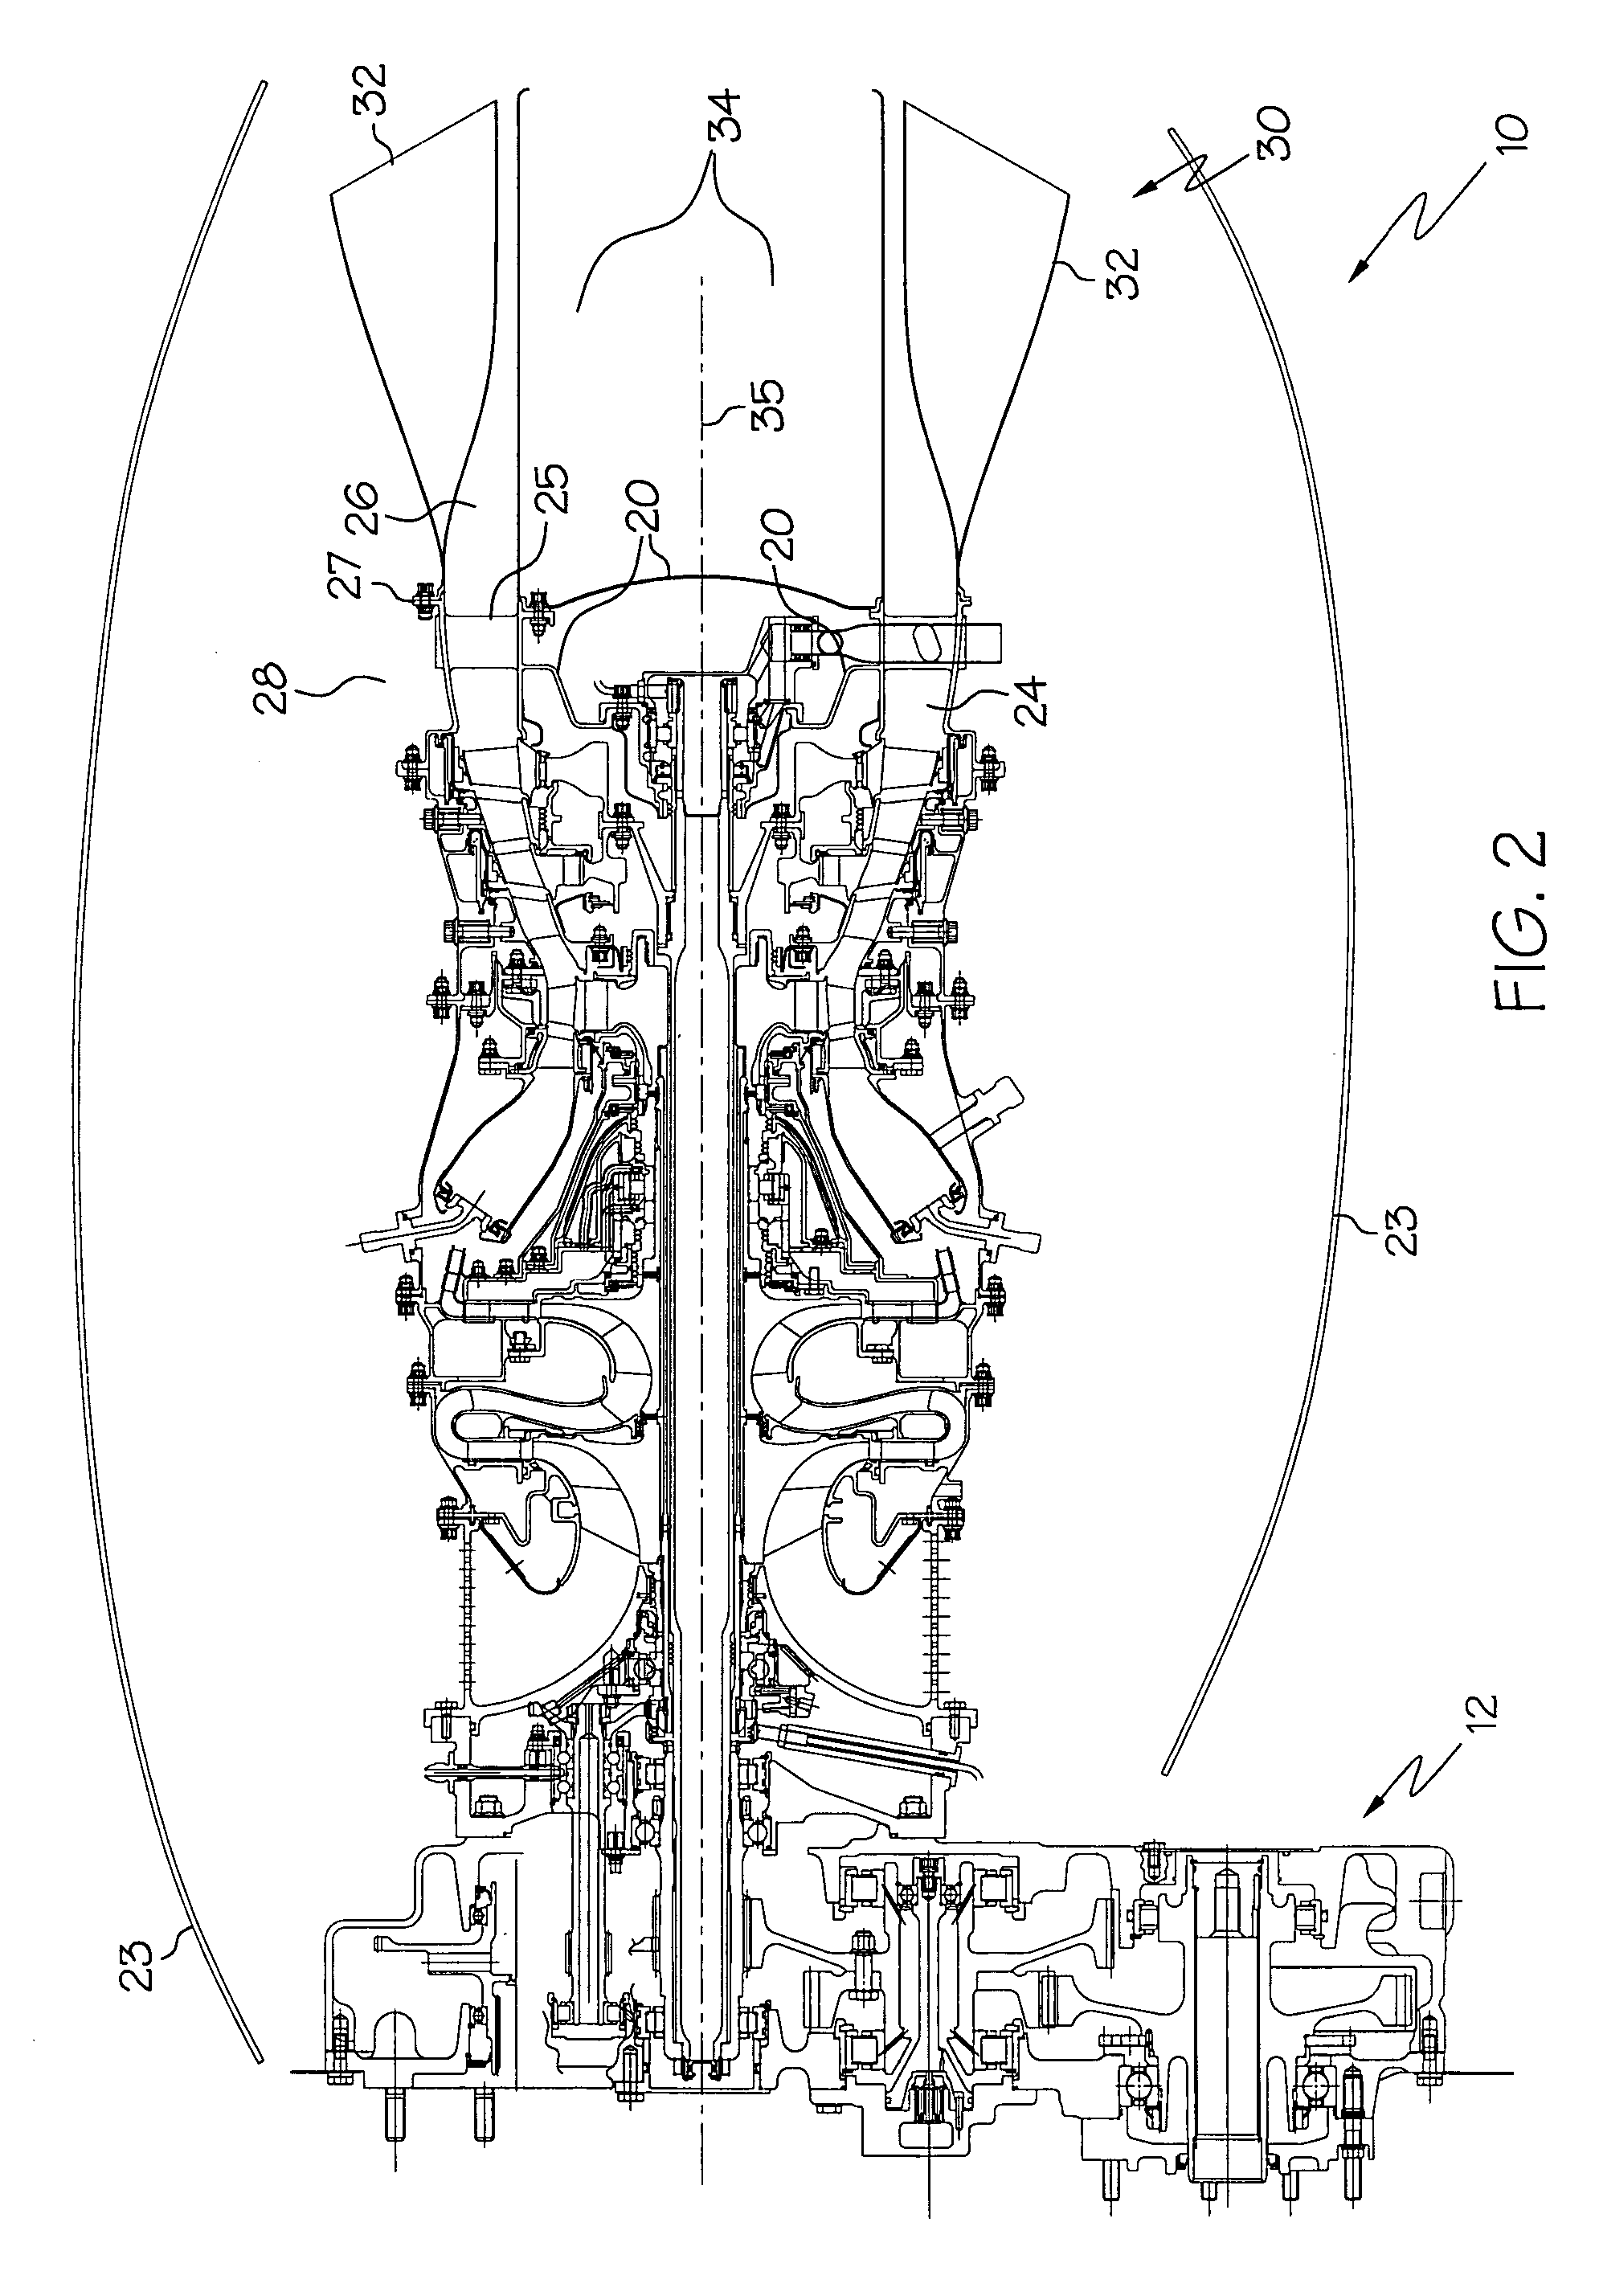 Twisted mixer with open center body